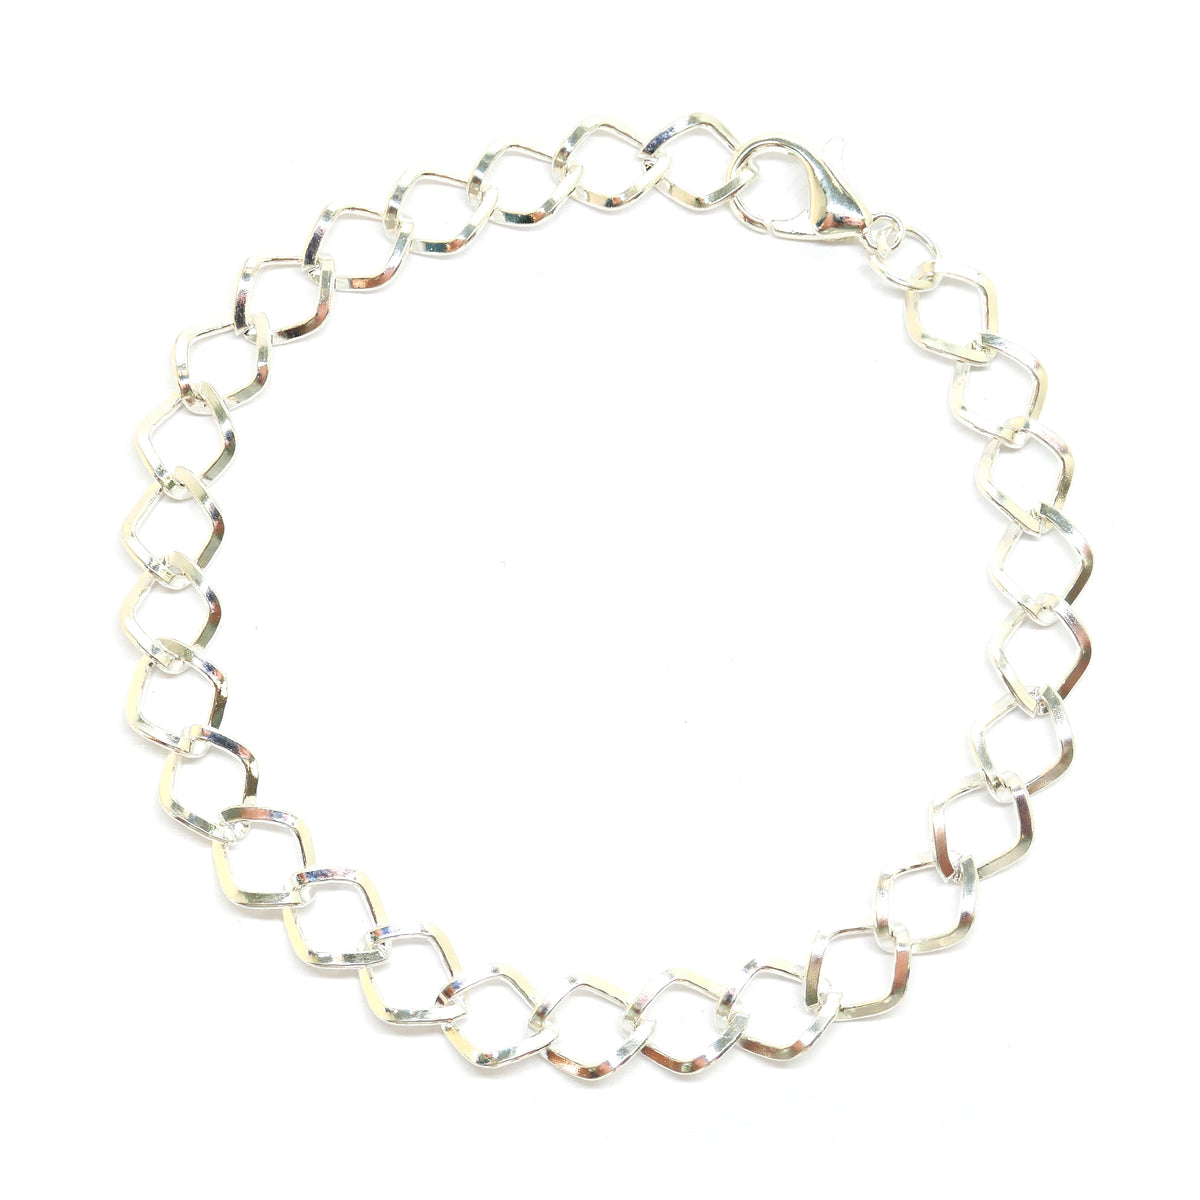 Cable Chain Bracelet | Light Weight Jewellery Online